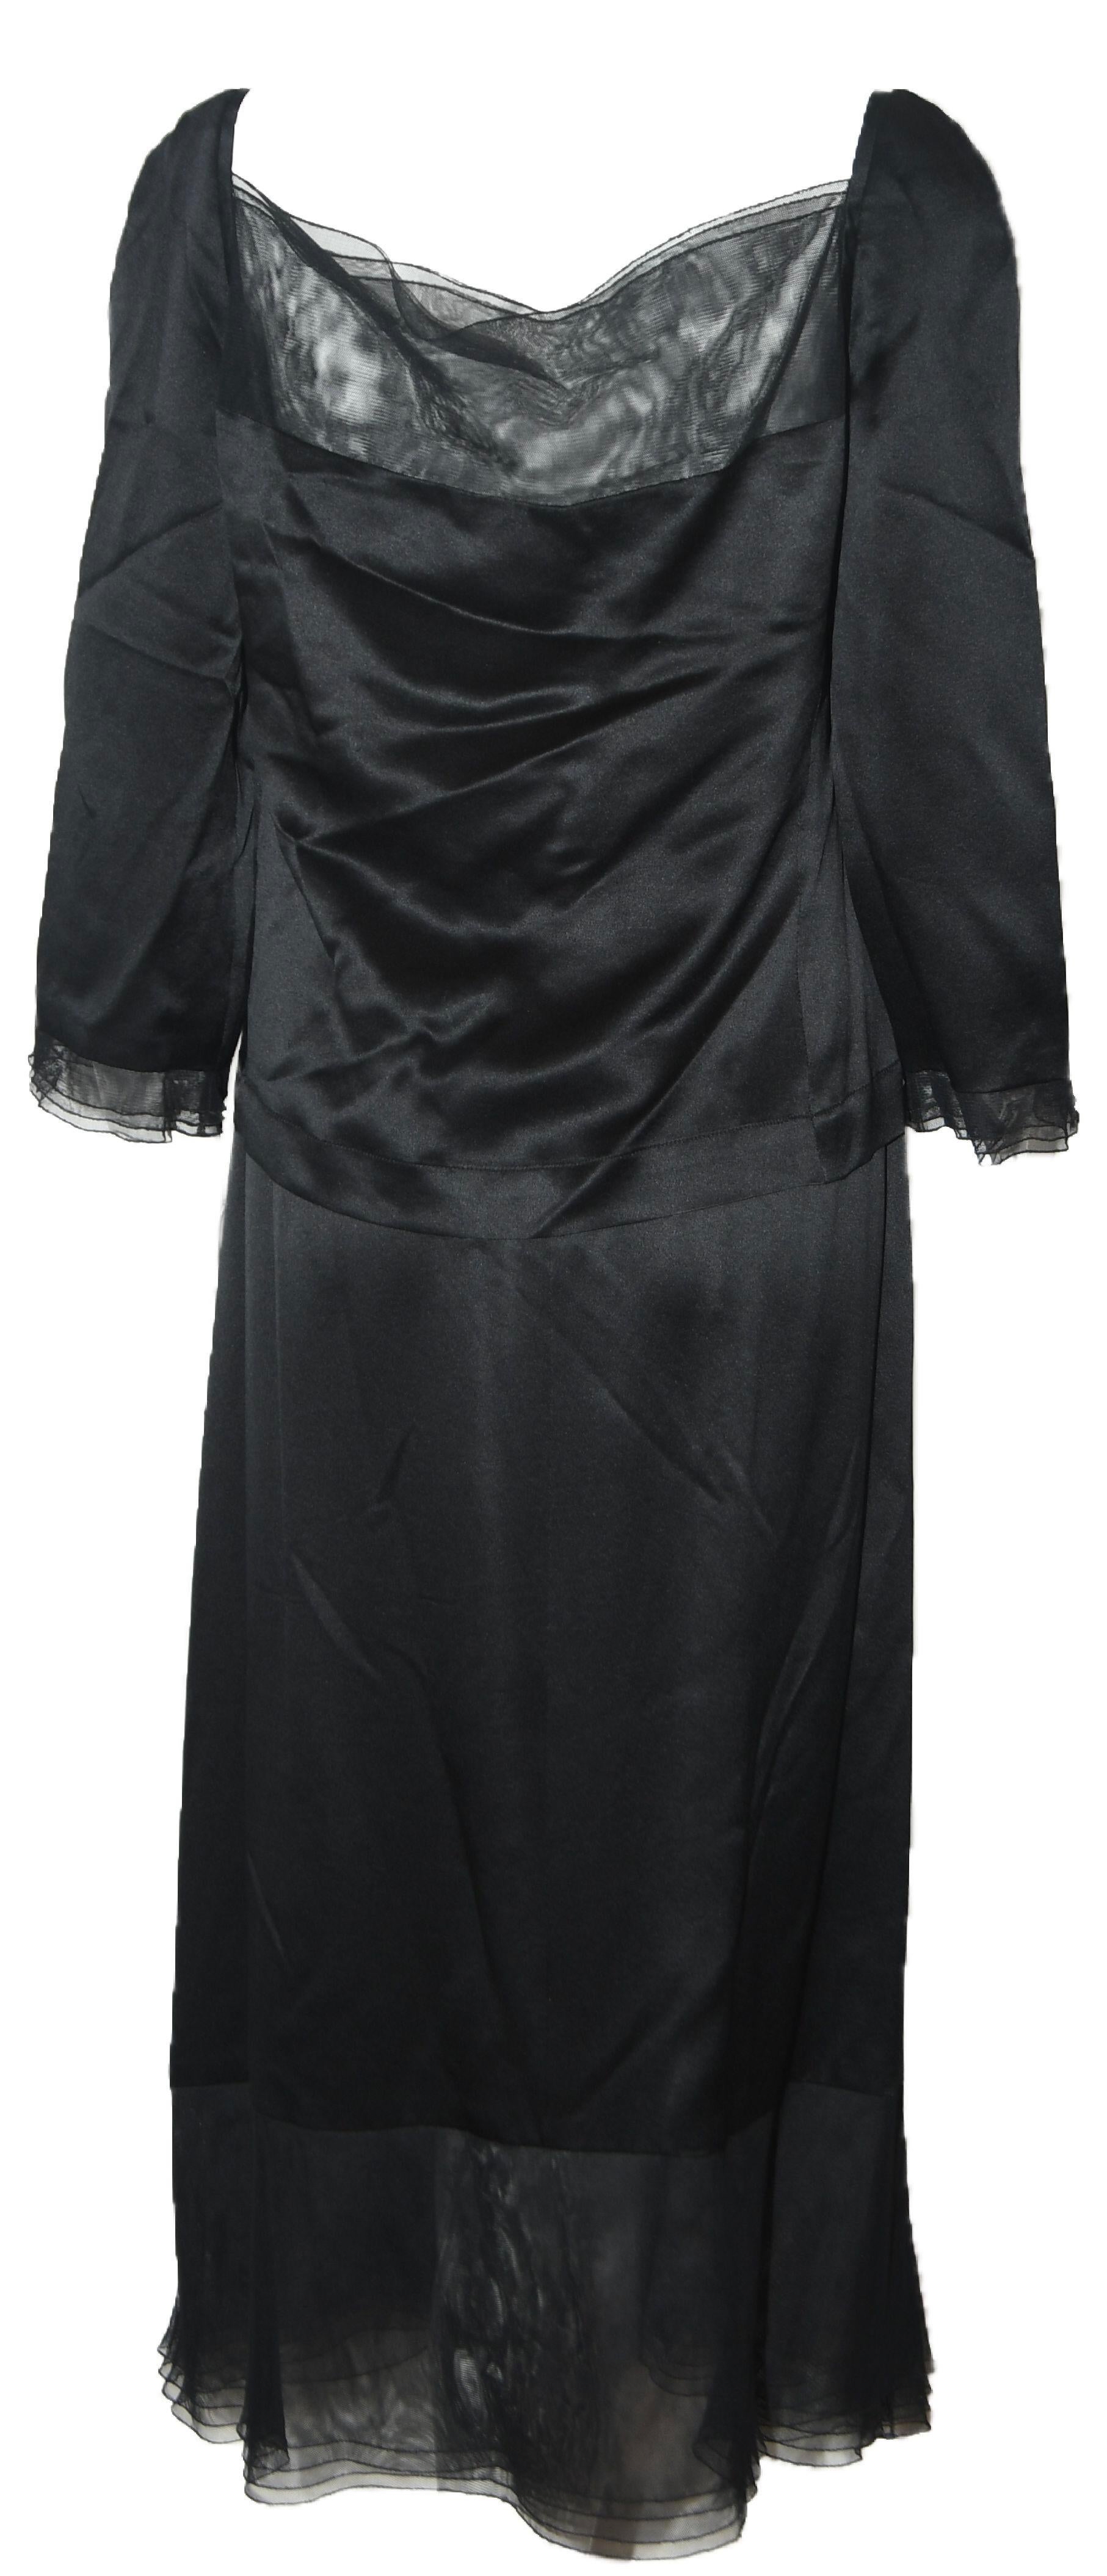 Chanel Black Silk 2 Piece Long Sleeve Top & Long Skirt Dress 42 In Excellent Condition For Sale In Palm Beach, FL